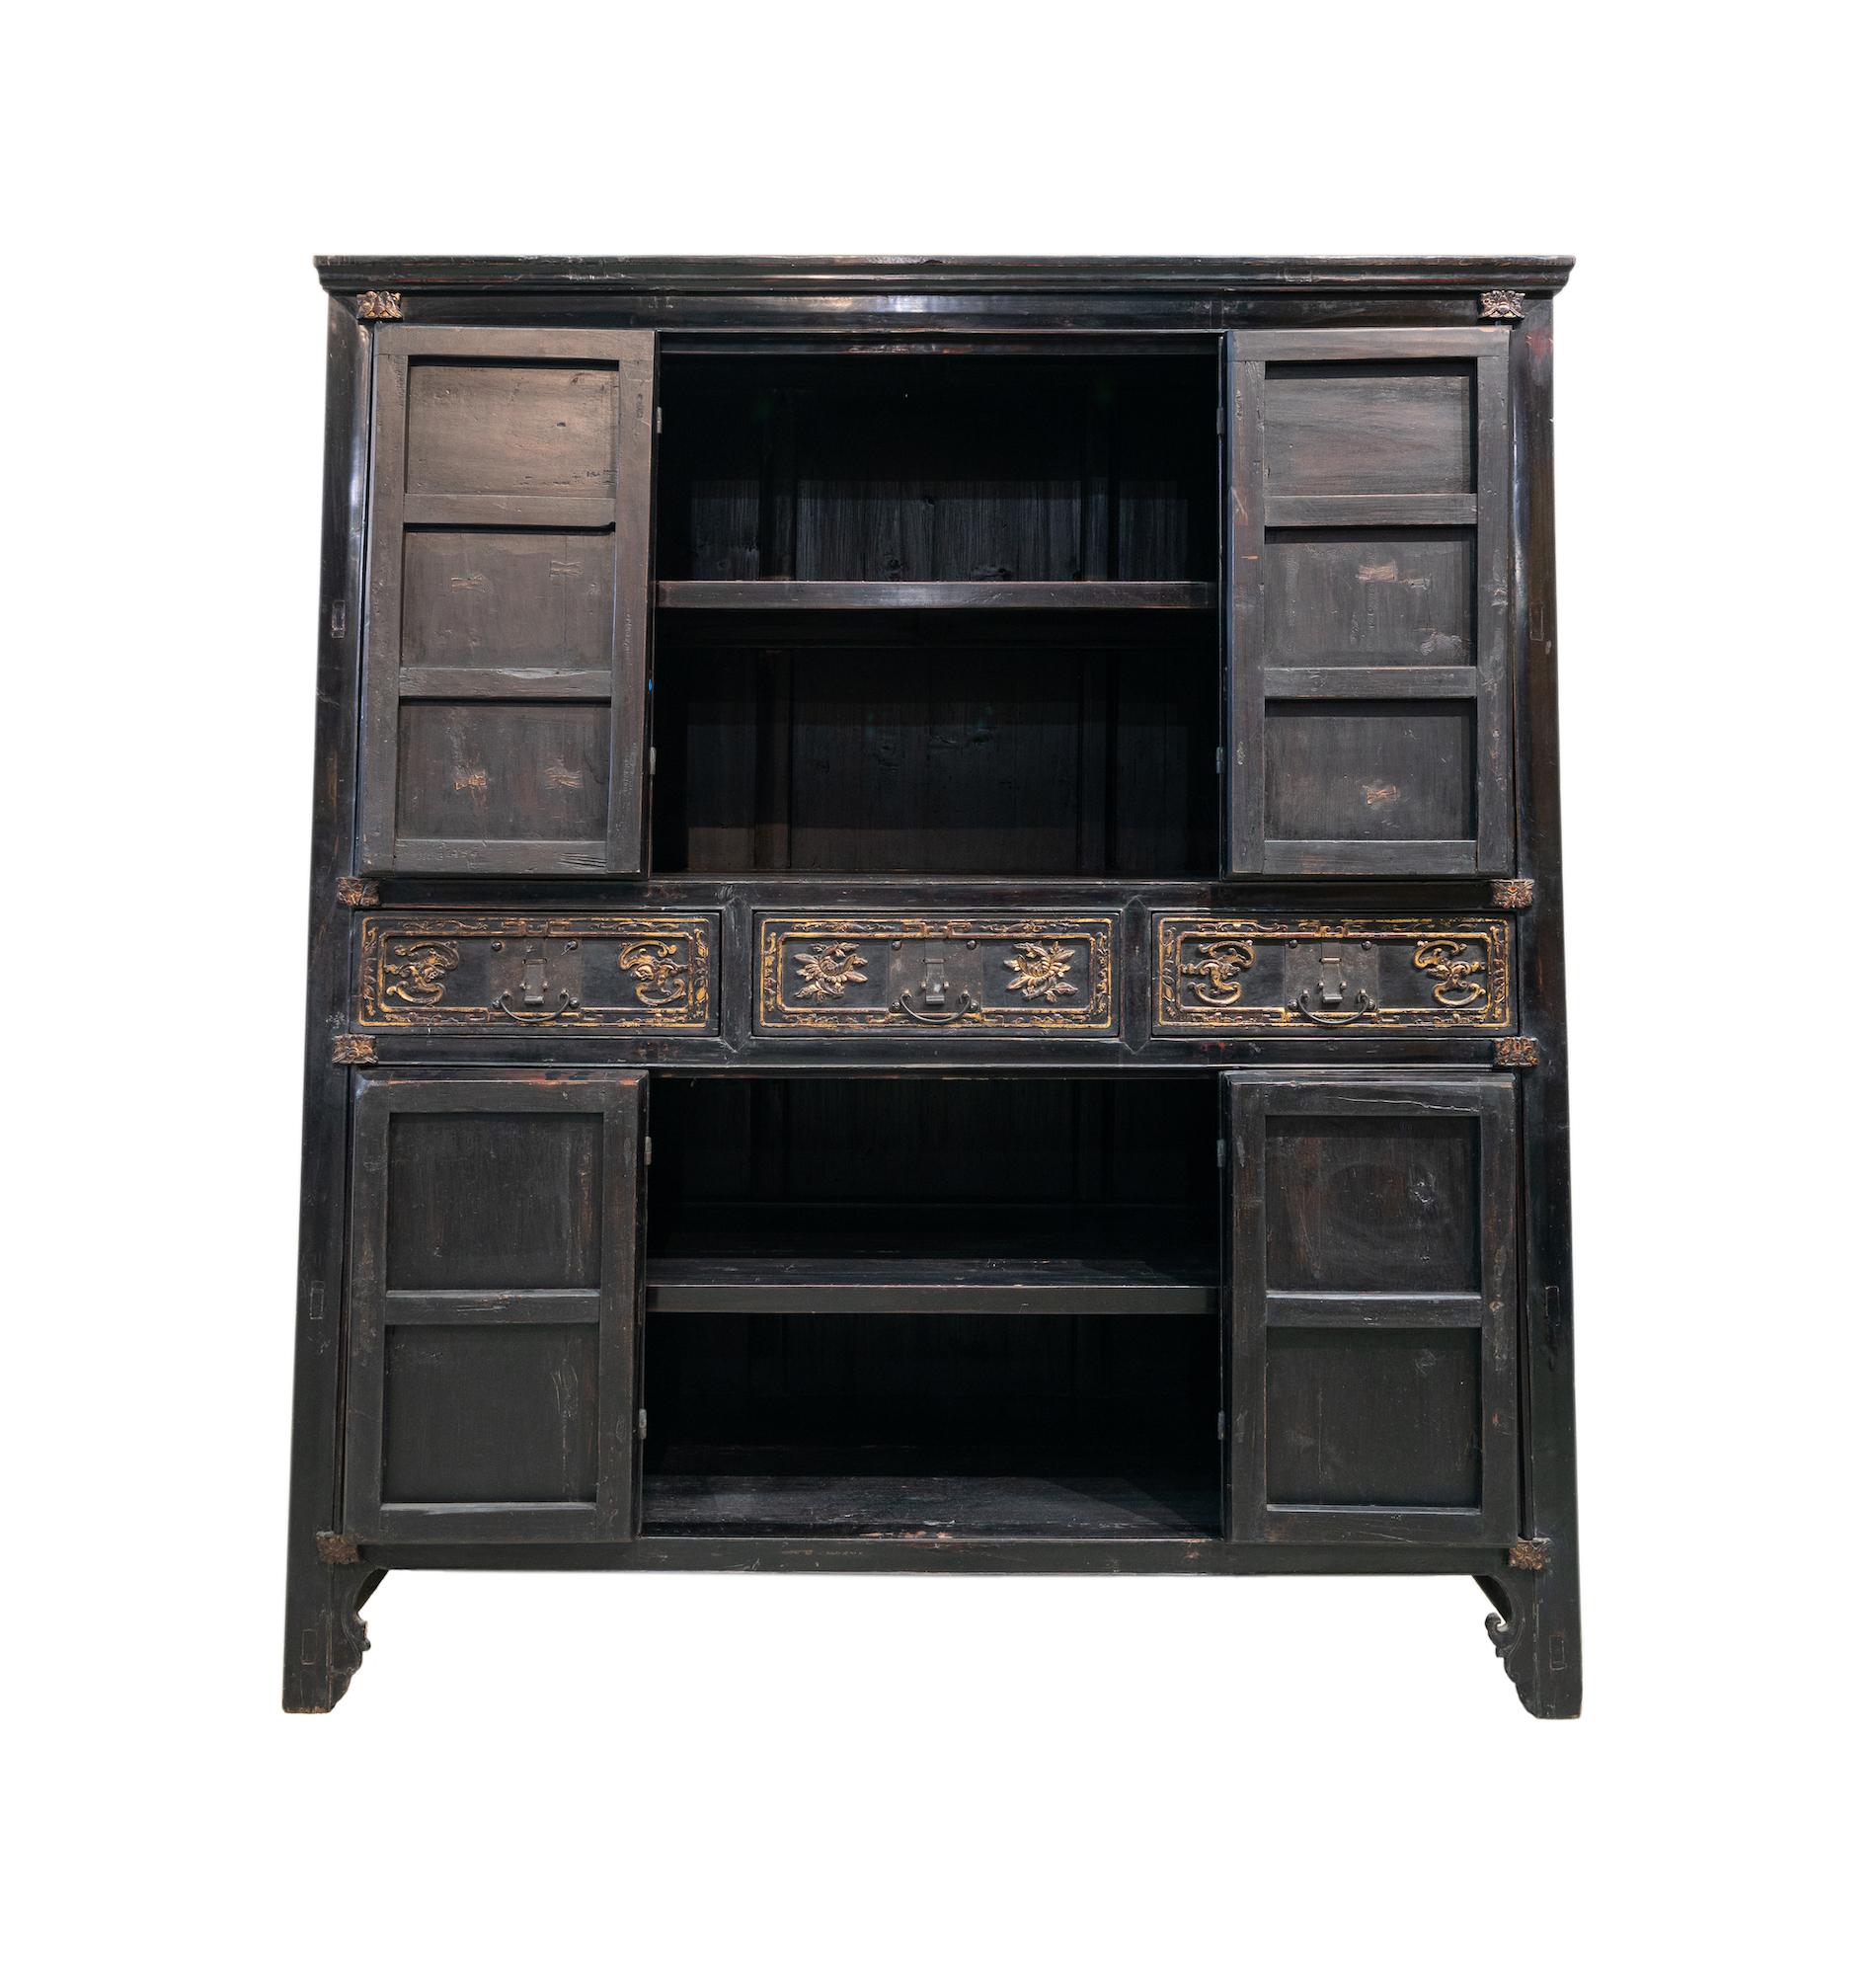 A late 19th century 8-door cabinet with carving from Dong Yang city, Zhejiang province, China. This design is very typical of cabinets from this region, which is famed for their wood carvings. The small carved panels on the top doors have intricate